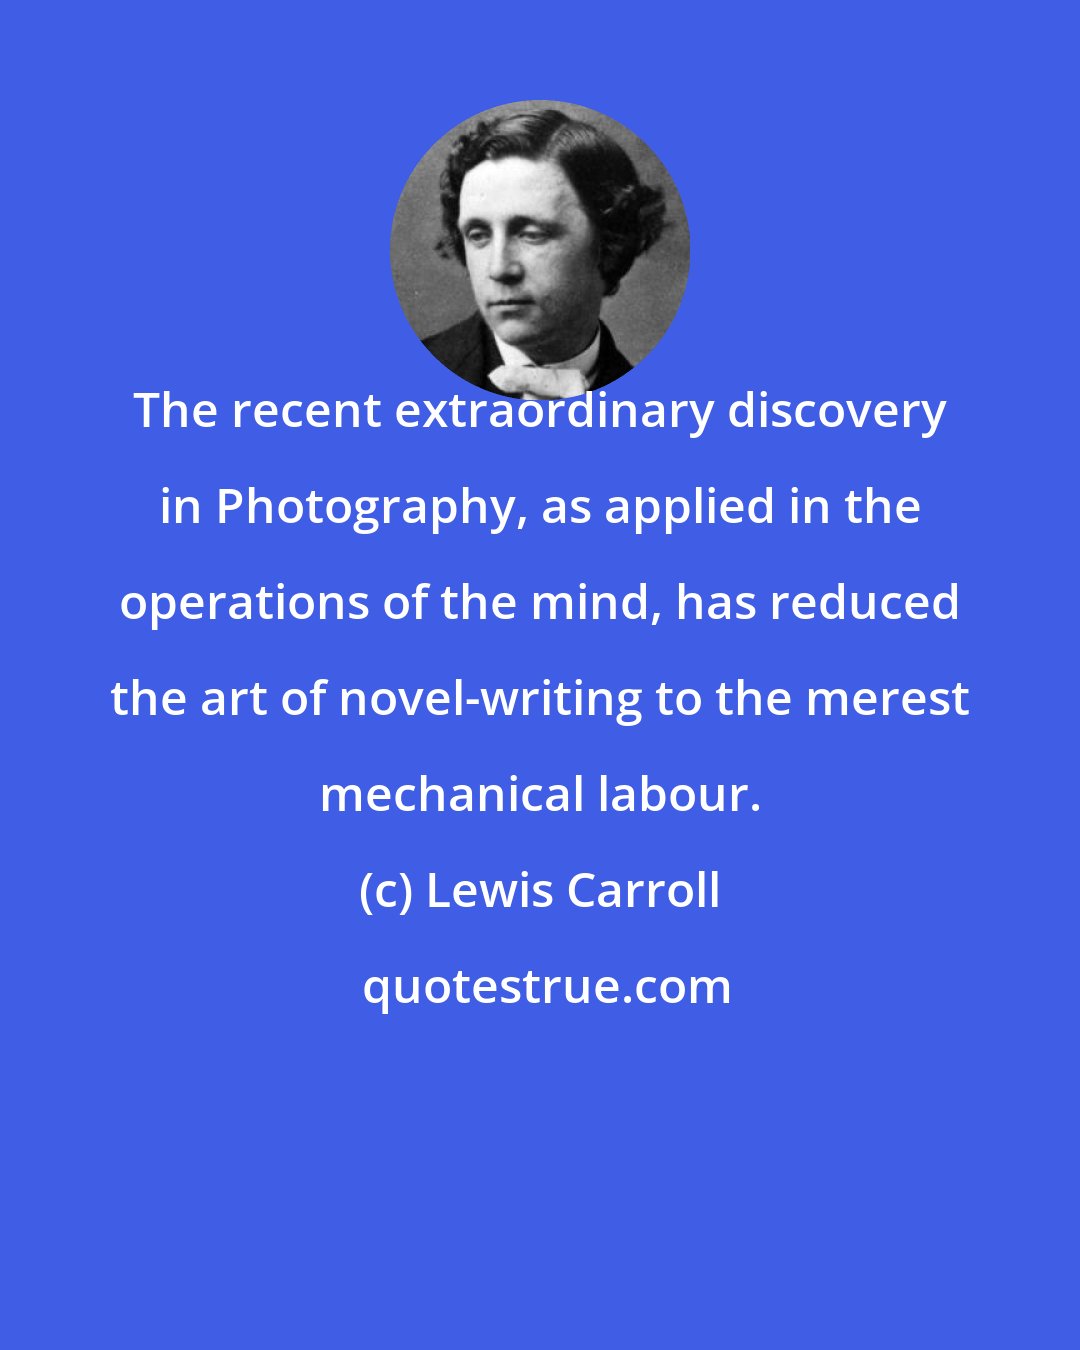 Lewis Carroll: The recent extraordinary discovery in Photography, as applied in the operations of the mind, has reduced the art of novel-writing to the merest mechanical labour.